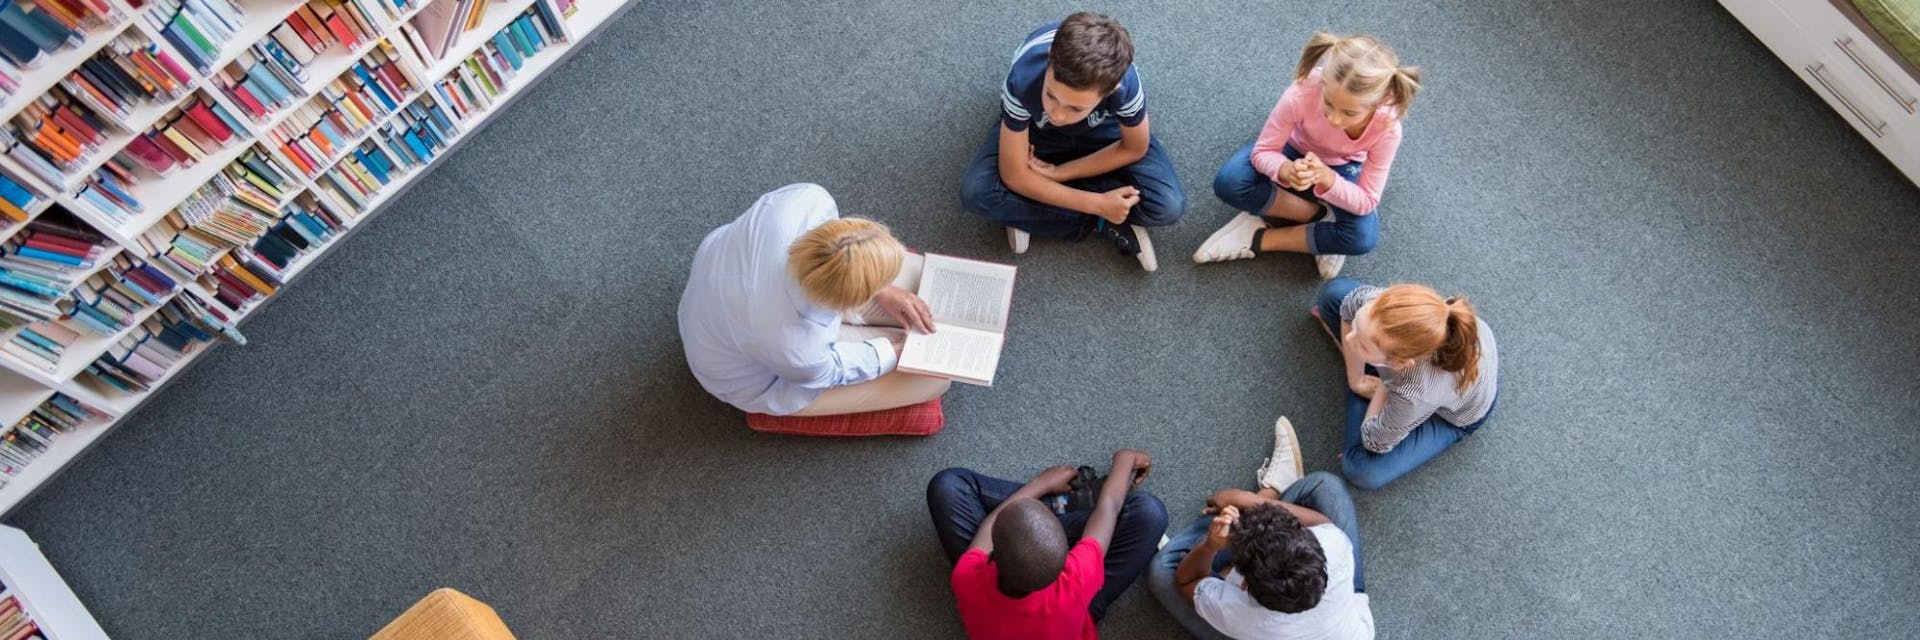 Bird's-eye view of a teacher and five students sitting on the ground during reading activities.